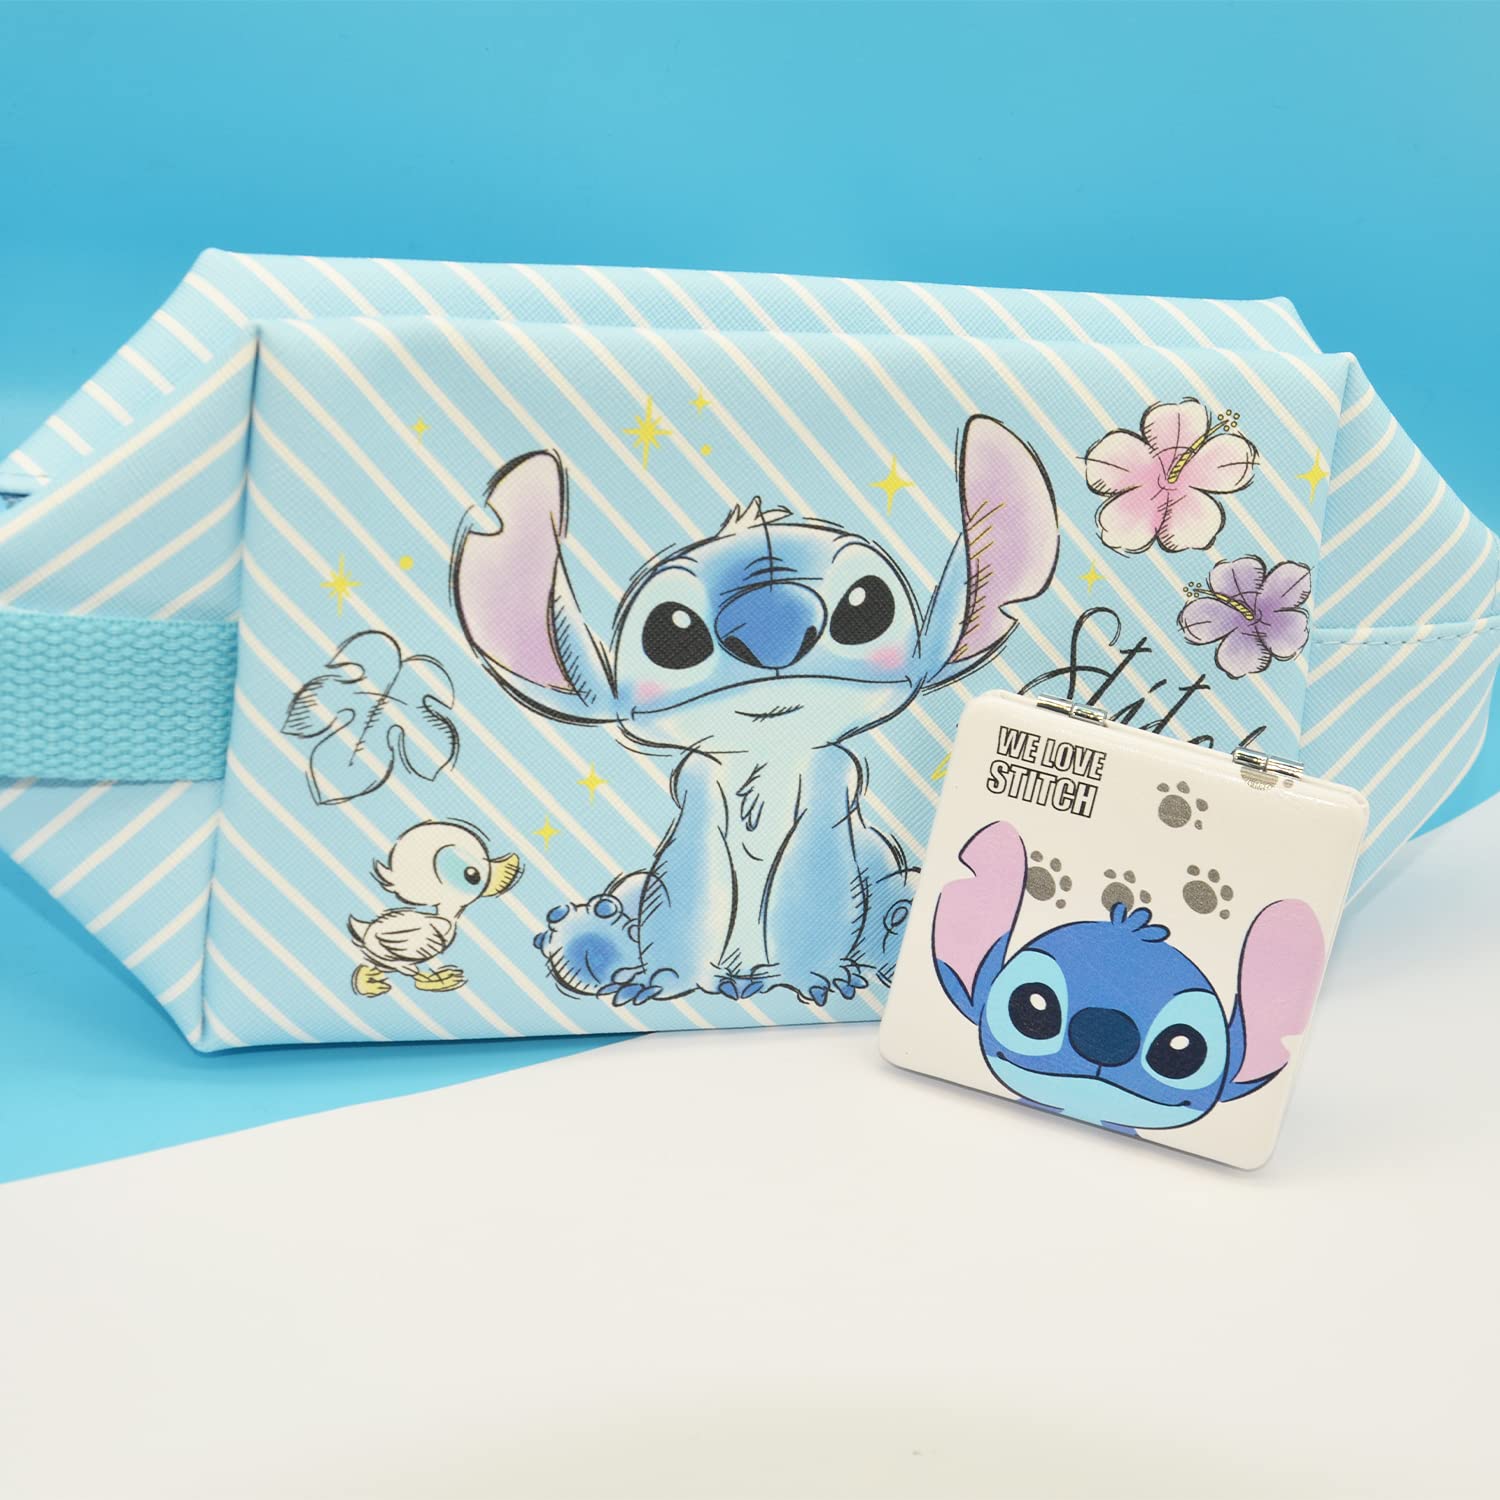 Stitch Travel Cosmetic Pouch, Large Capacity Cartoon Zippered PU Bag, Foldable Makeup Accessories Organizer and Storage for Women and Girls